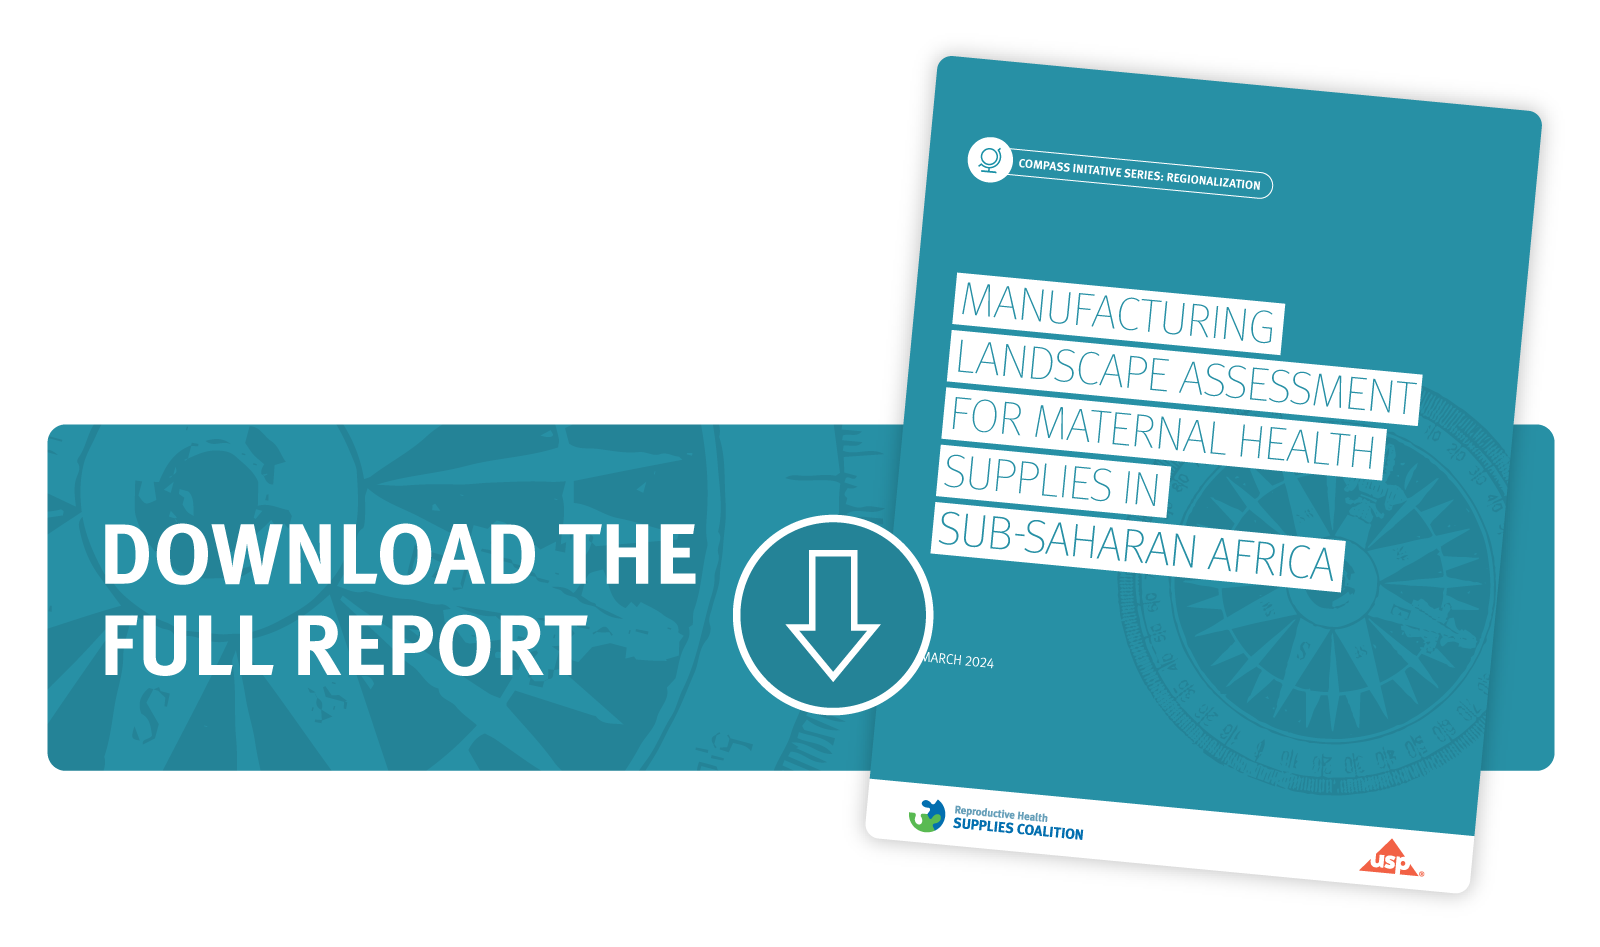 Download the full report